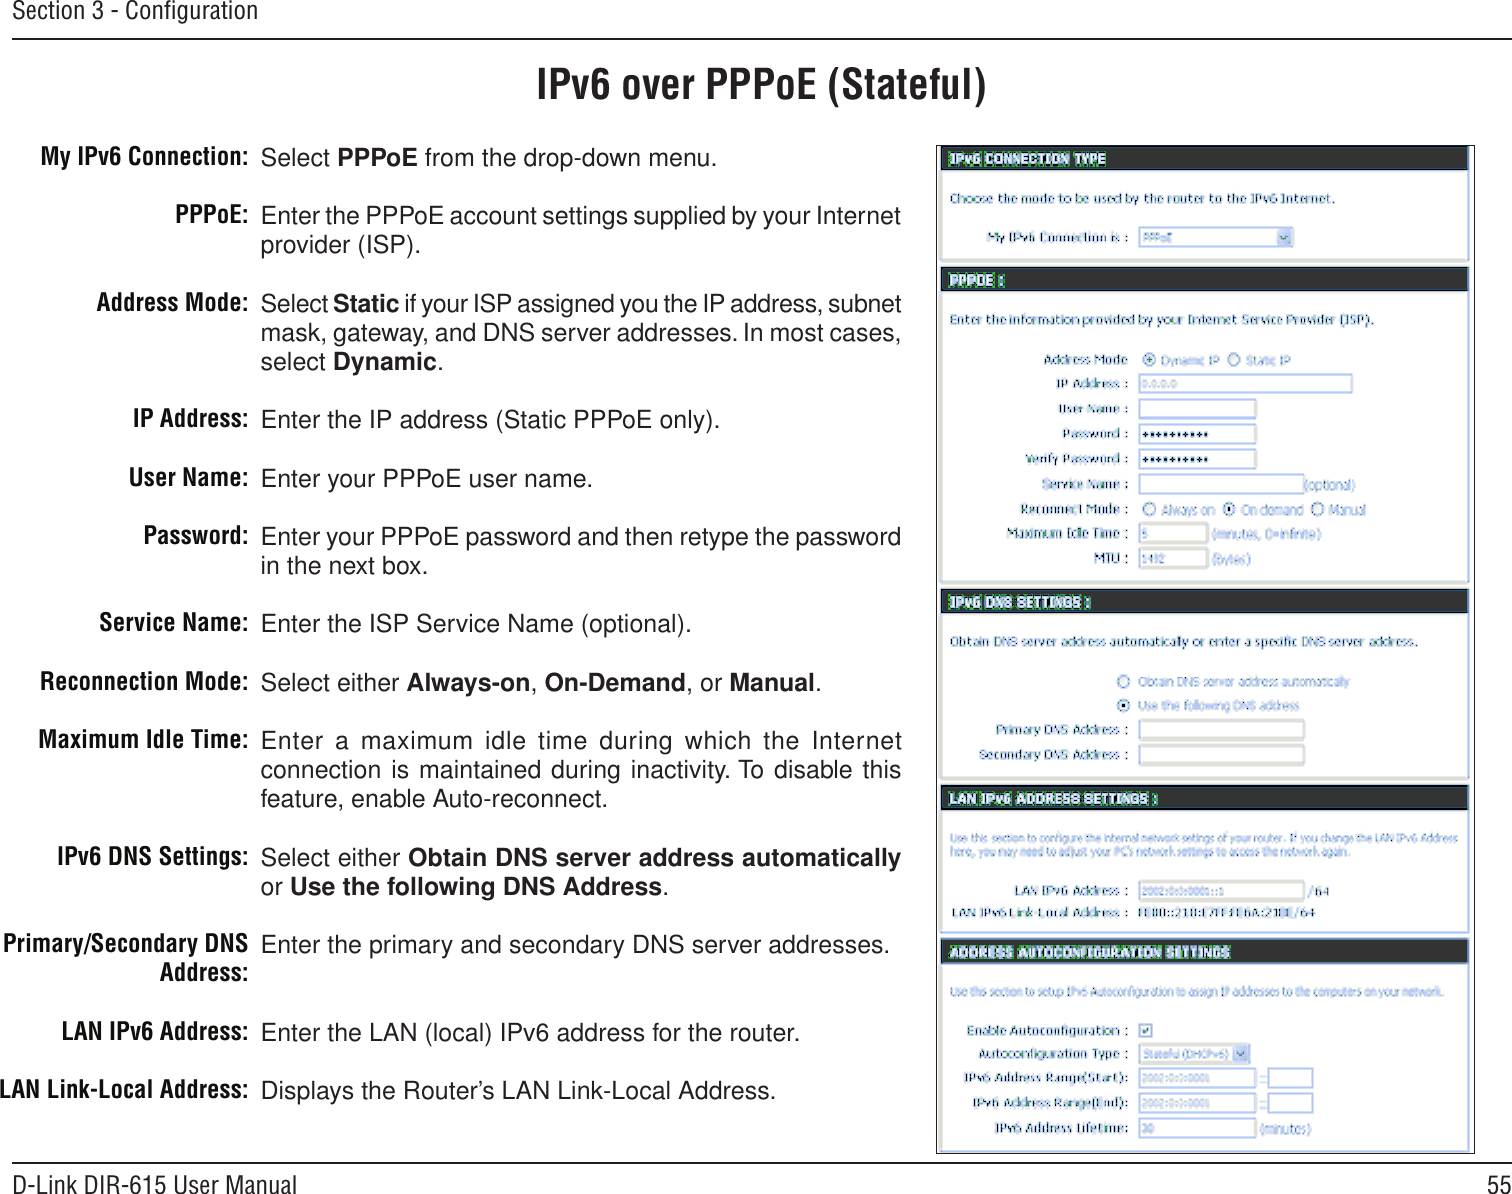 55D-Link DIR-615 User ManualSection 3 - ConﬁgurationIPv6 over PPPoE (Stateful)Select PPPoE from the drop-down menu.Enter the PPPoE account settings supplied by your Internet provider (ISP). Select Static if your ISP assigned you the IP address, subnet mask, gateway, and DNS server addresses. In most cases, select Dynamic.Enter the IP address (Static PPPoE only).Enter your PPPoE user name.Enter your PPPoE password and then retype the password in the next box.Enter the ISP Service Name (optional).Select either Always-on, On-Demand, or Manual.Enter a maximum idle time during which the Internet connection is maintained during inactivity. To disable this feature, enable Auto-reconnect.Select either Obtain DNS server address automatically or Use the following DNS Address.Enter the primary and secondary DNS server addresses. Enter the LAN (local) IPv6 address for the router. Displays the Router’s LAN Link-Local Address.My IPv6 Connection:PPPoE:Address Mode:IP Address:User Name:Password:Service Name:Reconnection Mode:Maximum Idle Time:IPv6 DNS Settings:Primary/Secondary DNS Address:LAN IPv6 Address:LAN Link-Local Address: